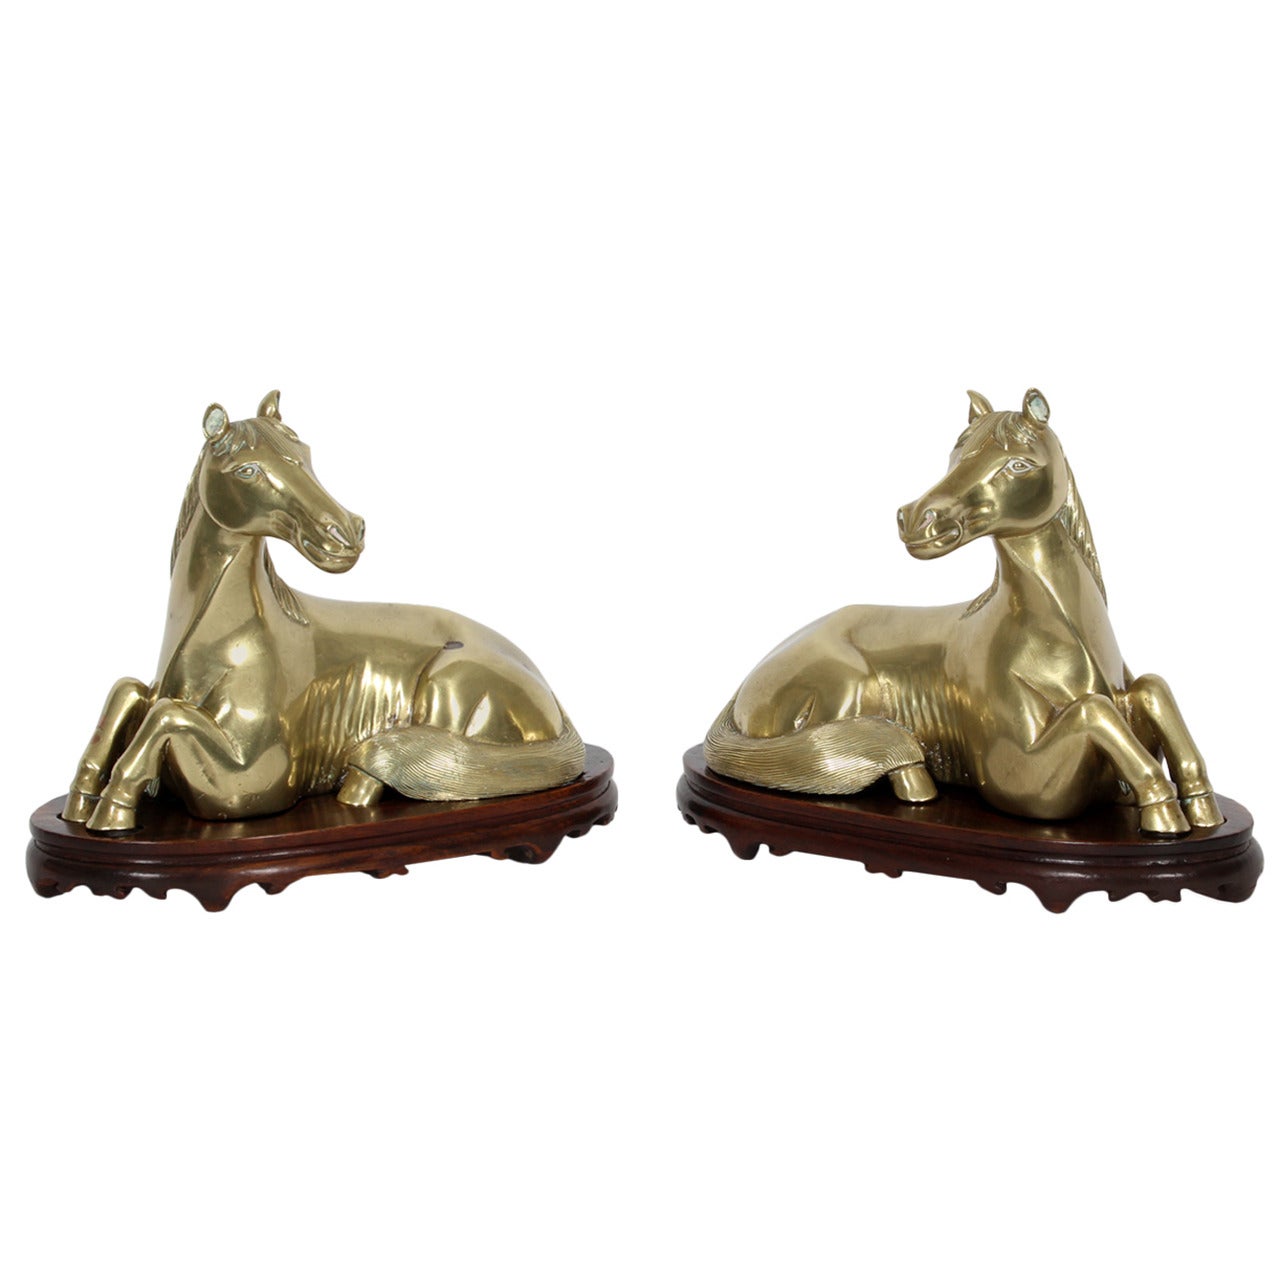 Pair of Horse Sculptures on Custom Stands